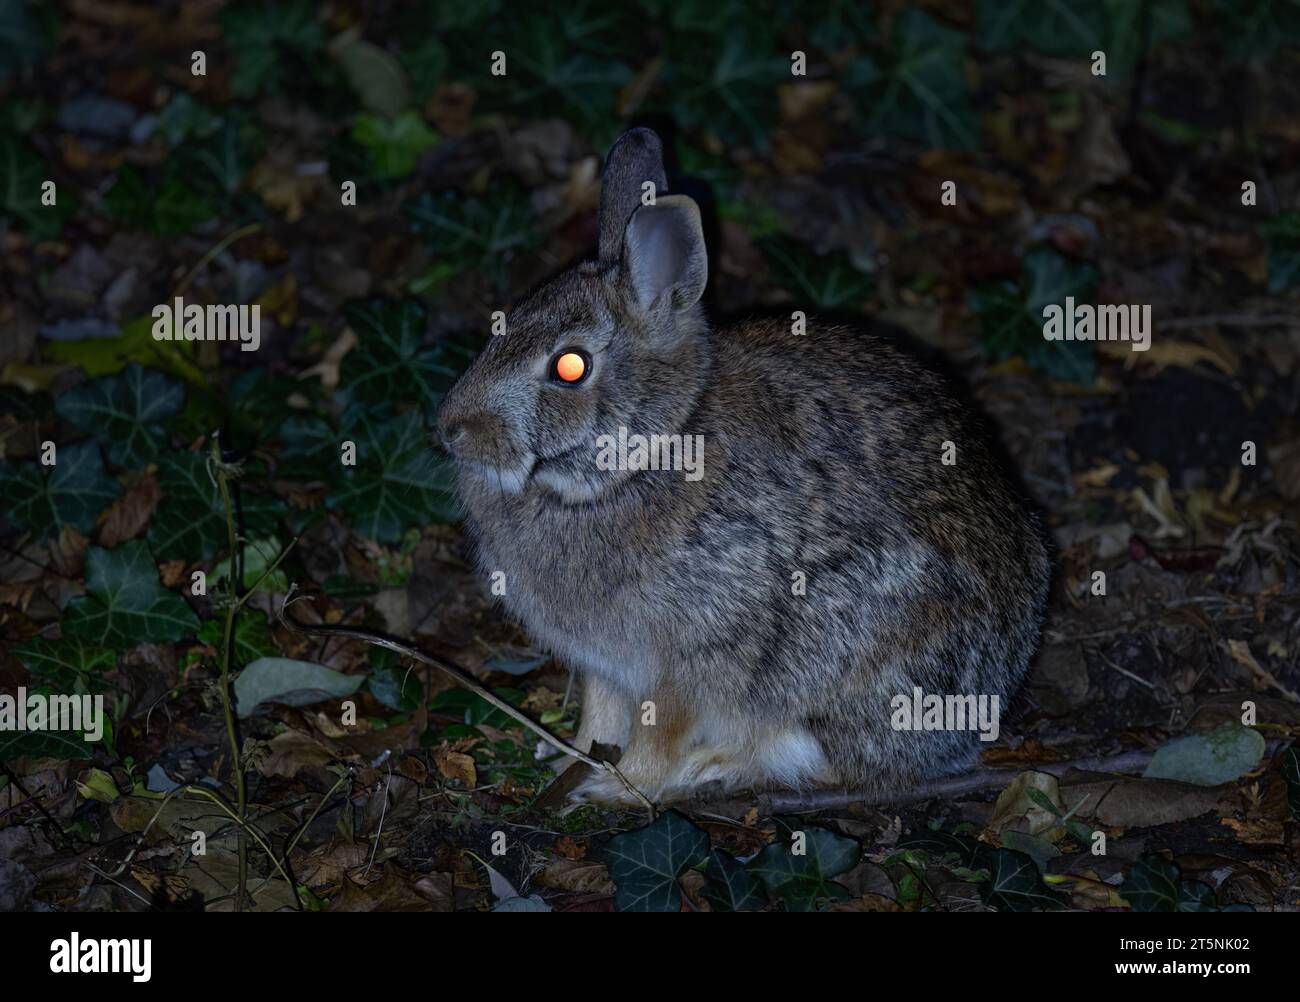 A cottontail rabbit's eyes glowing in the dark Stock Photo